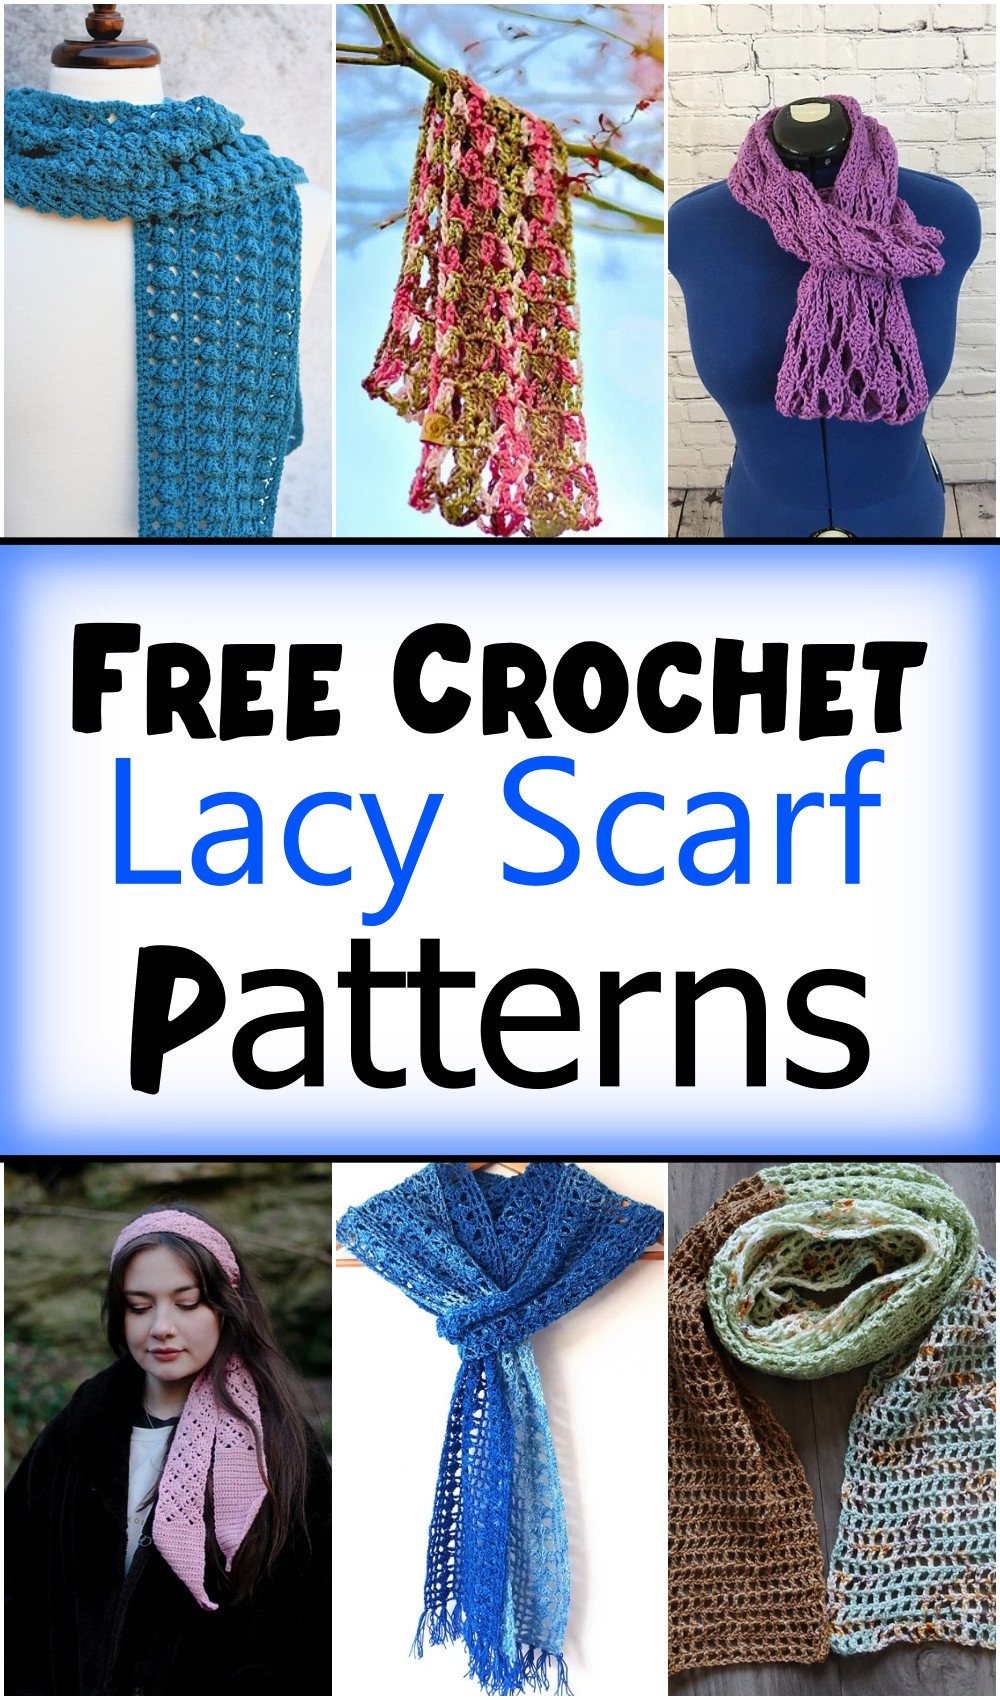 16 Crochet Lacy Scarf Free Patterns